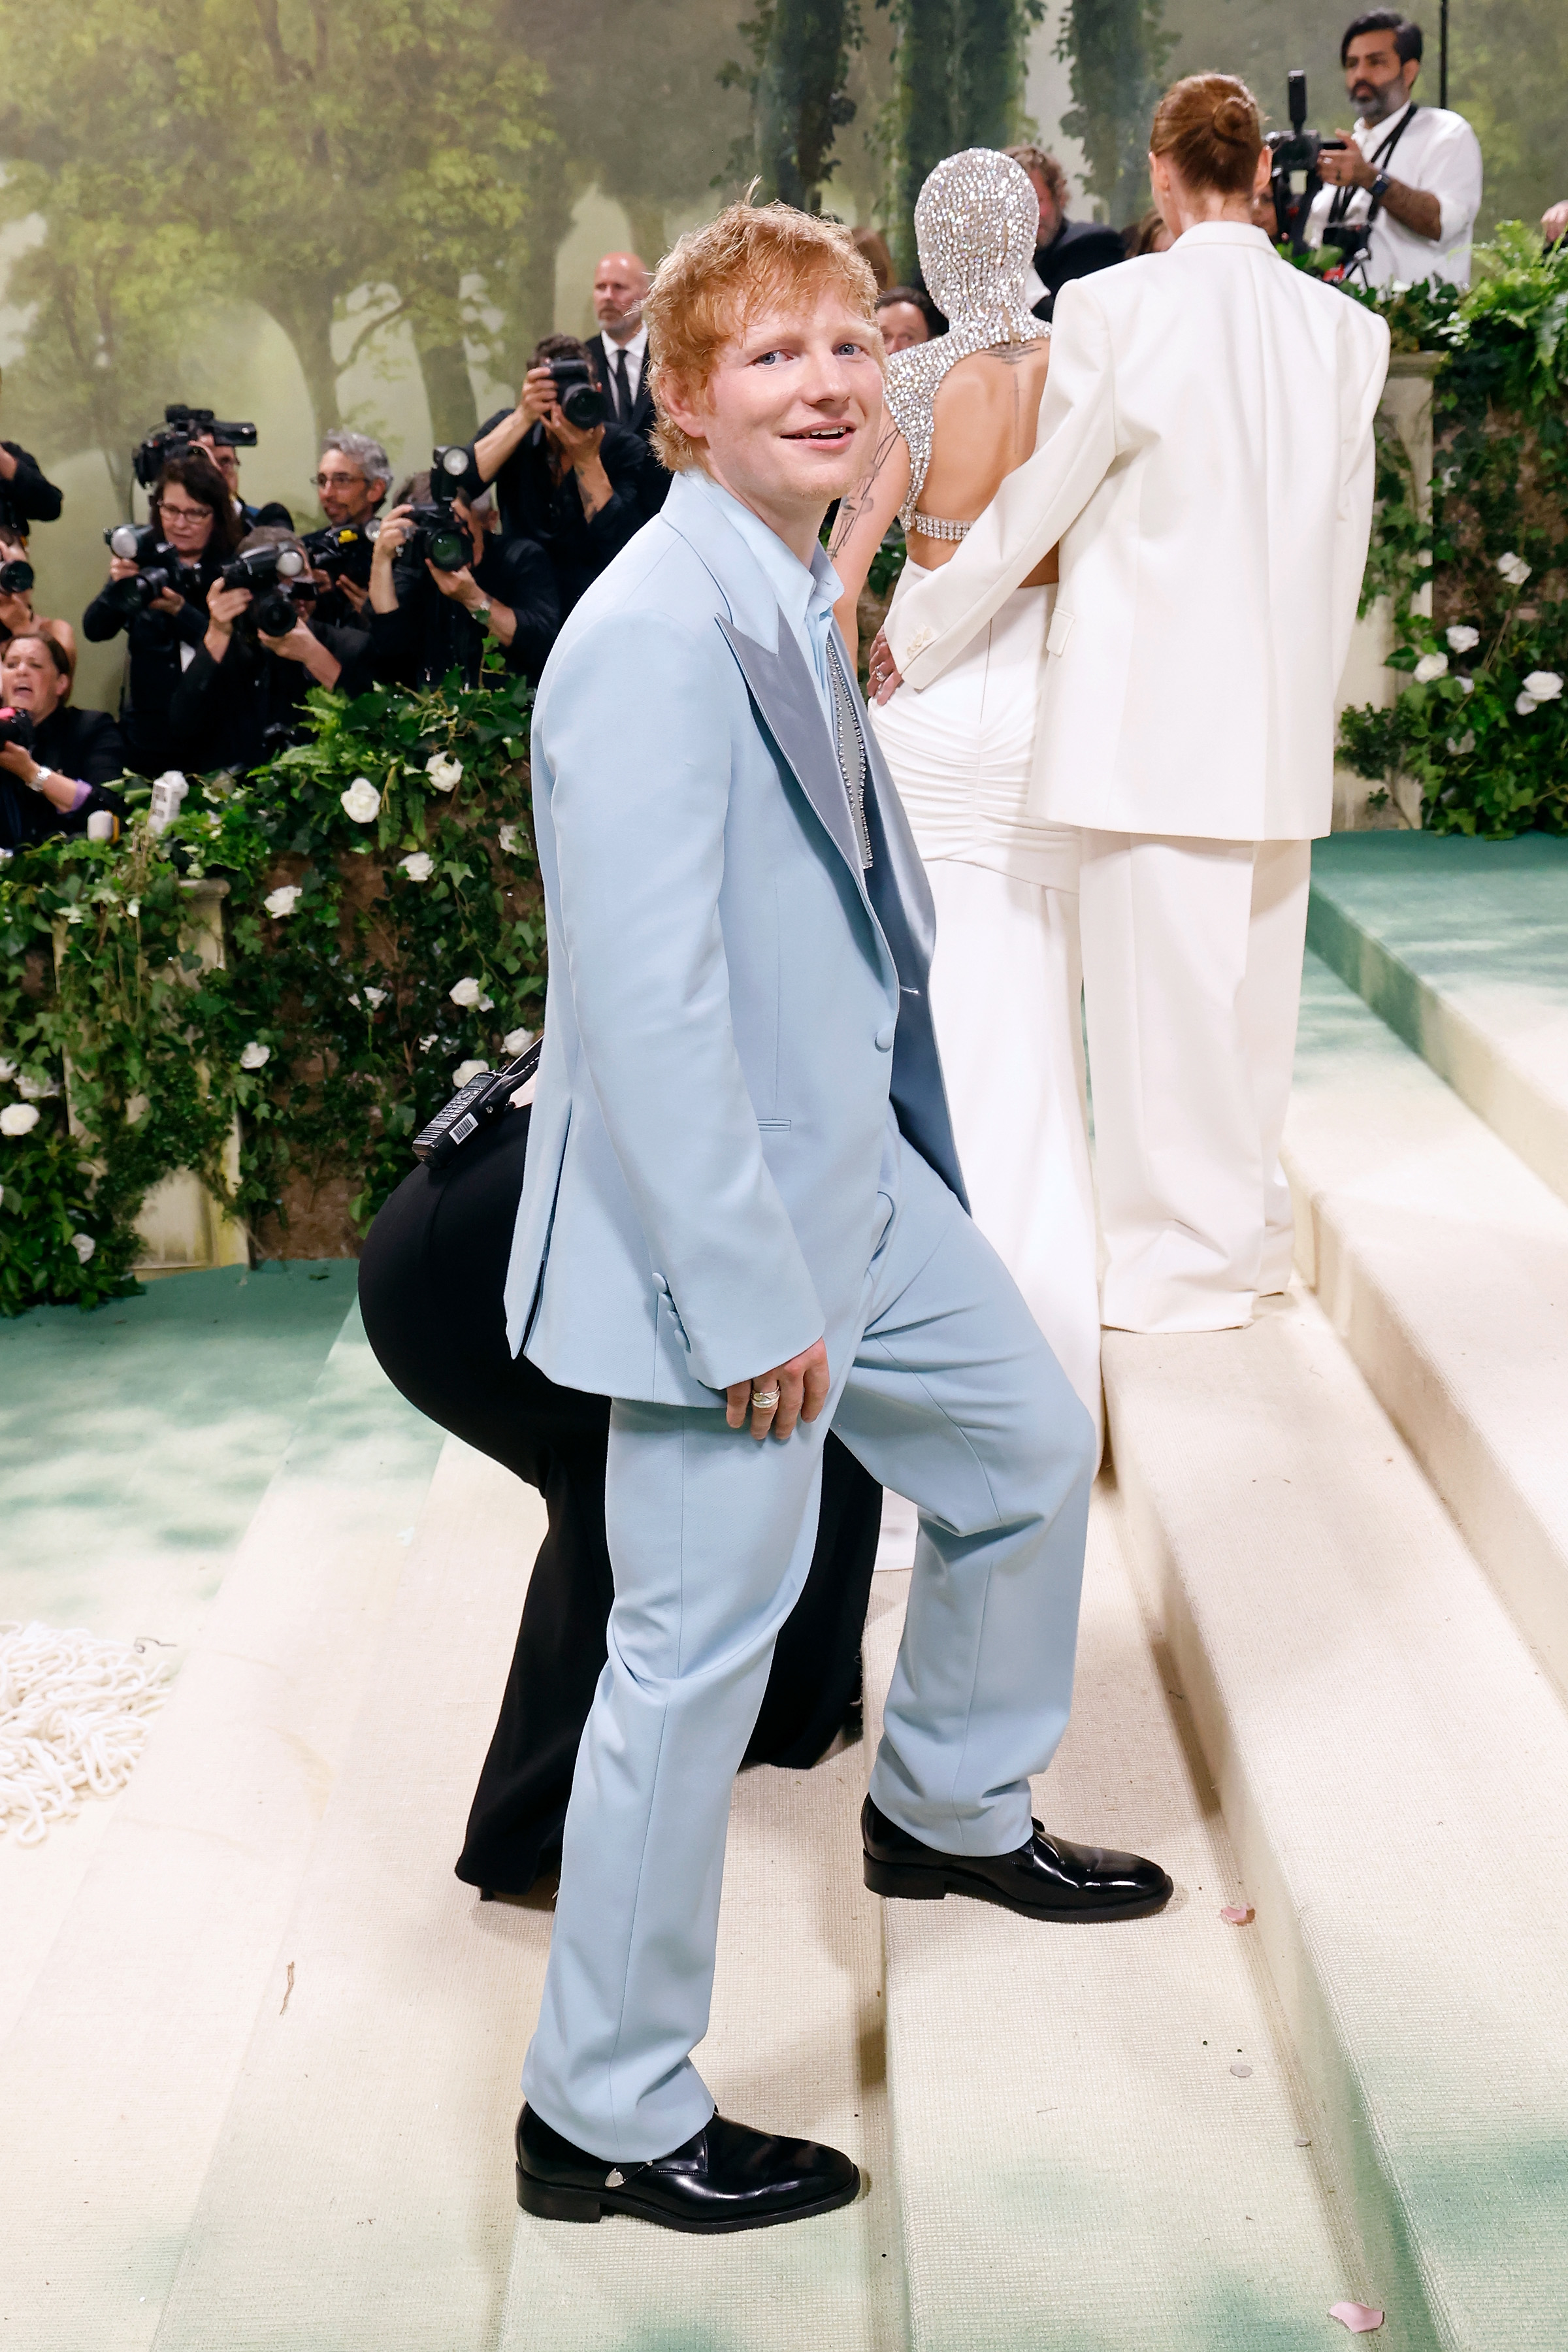 Ed Sheeran in a blue suit posing with photographers in the background at an event